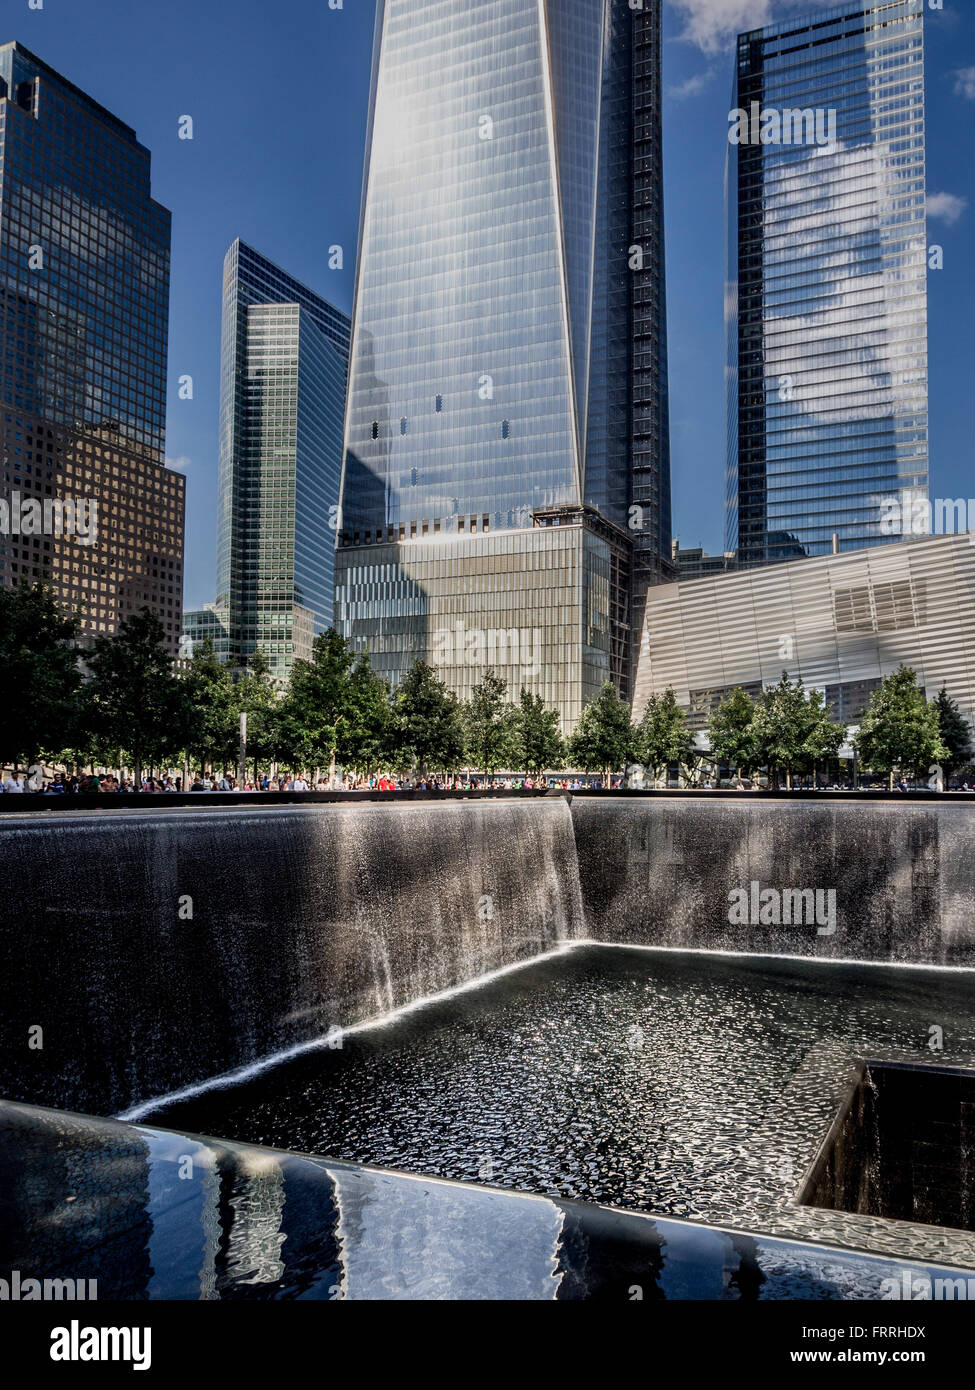 9/11 memorial, New York, USA Banque D'Images